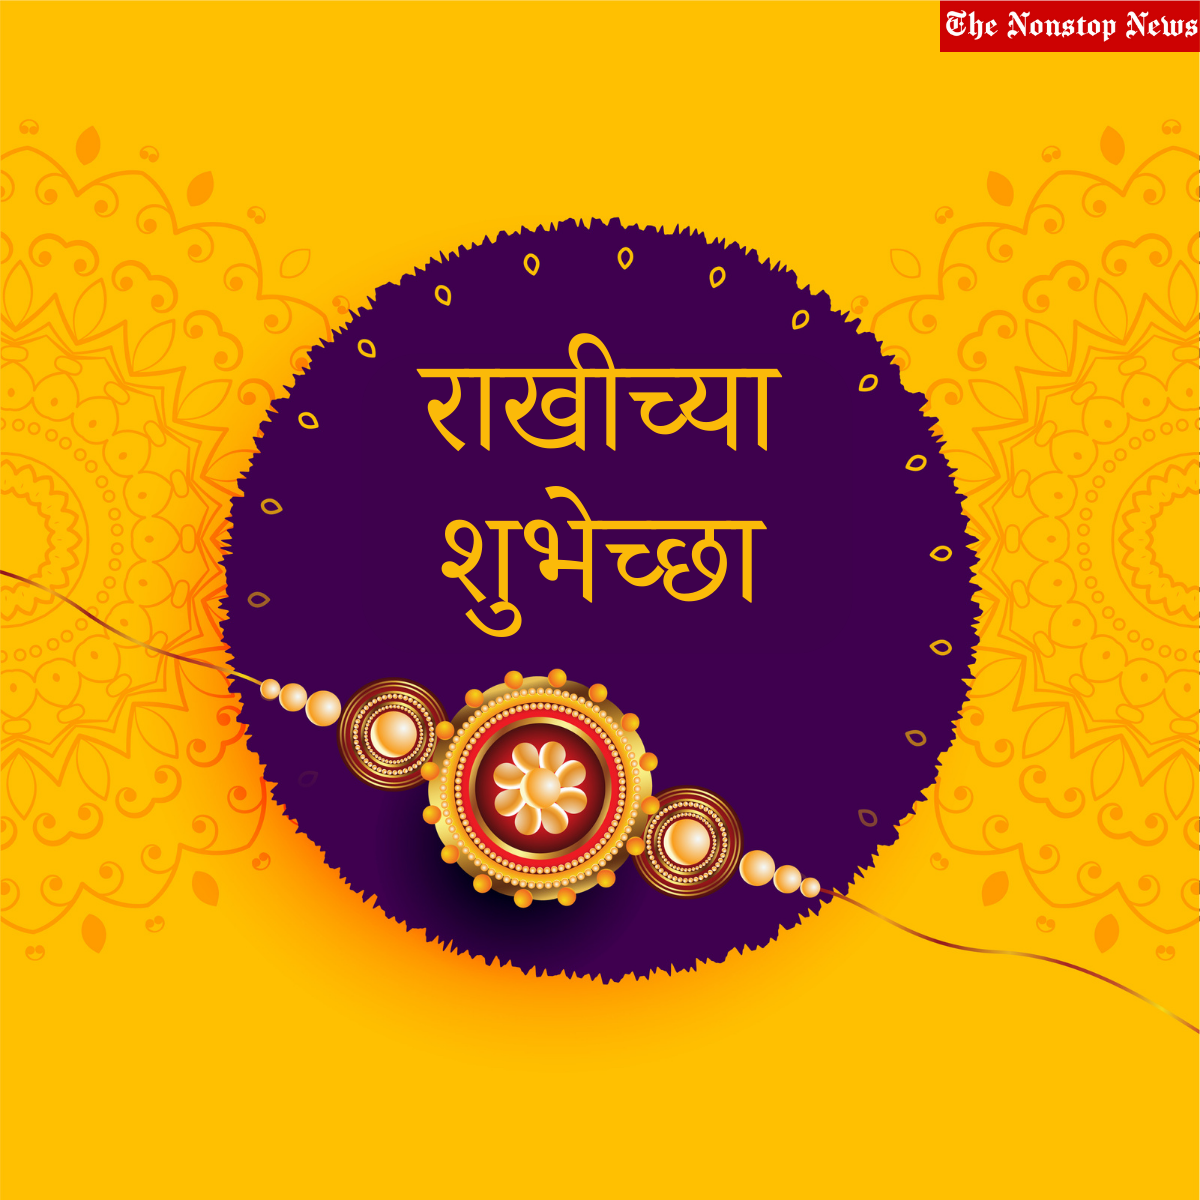 Happy Rakhi 2022 Quotes In Marathi: Messages, Greetings, HD Images, Posters, Shayari, Wishes to share via facebook or whatsapp